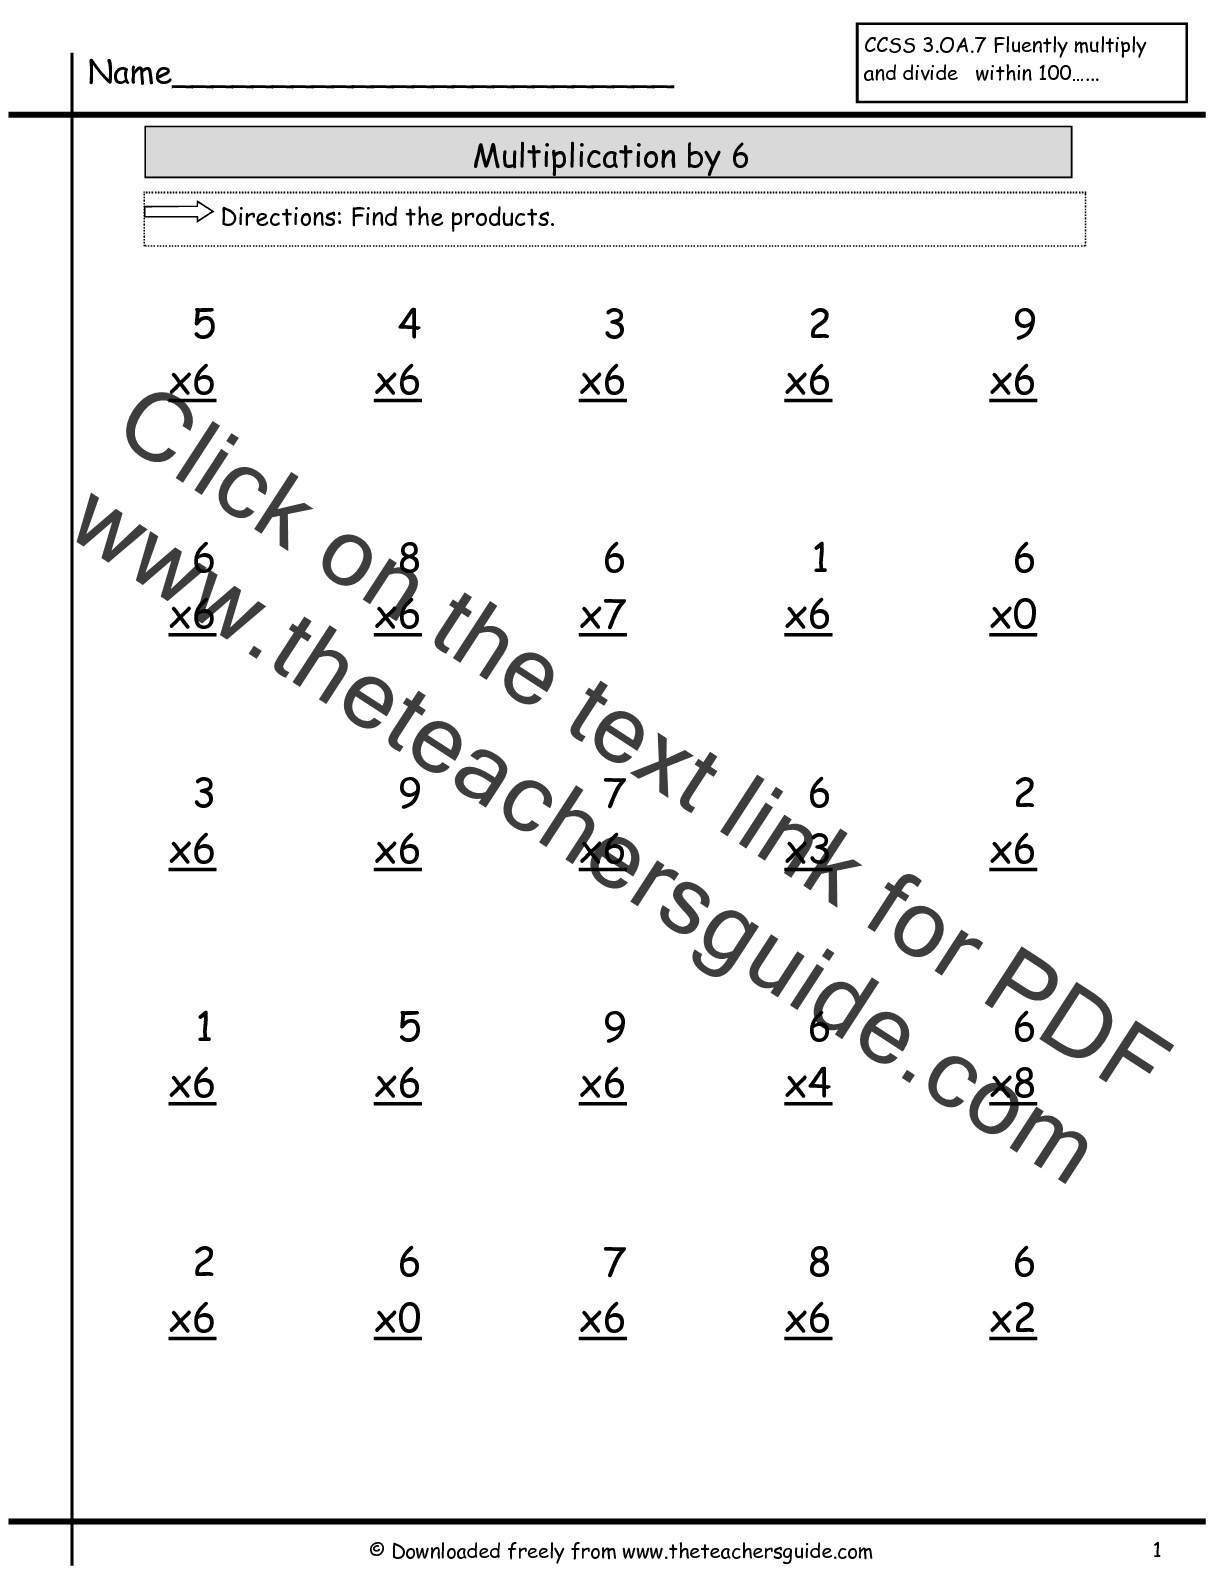  Multiplication Facts Worksheets From The Teacher s Guide